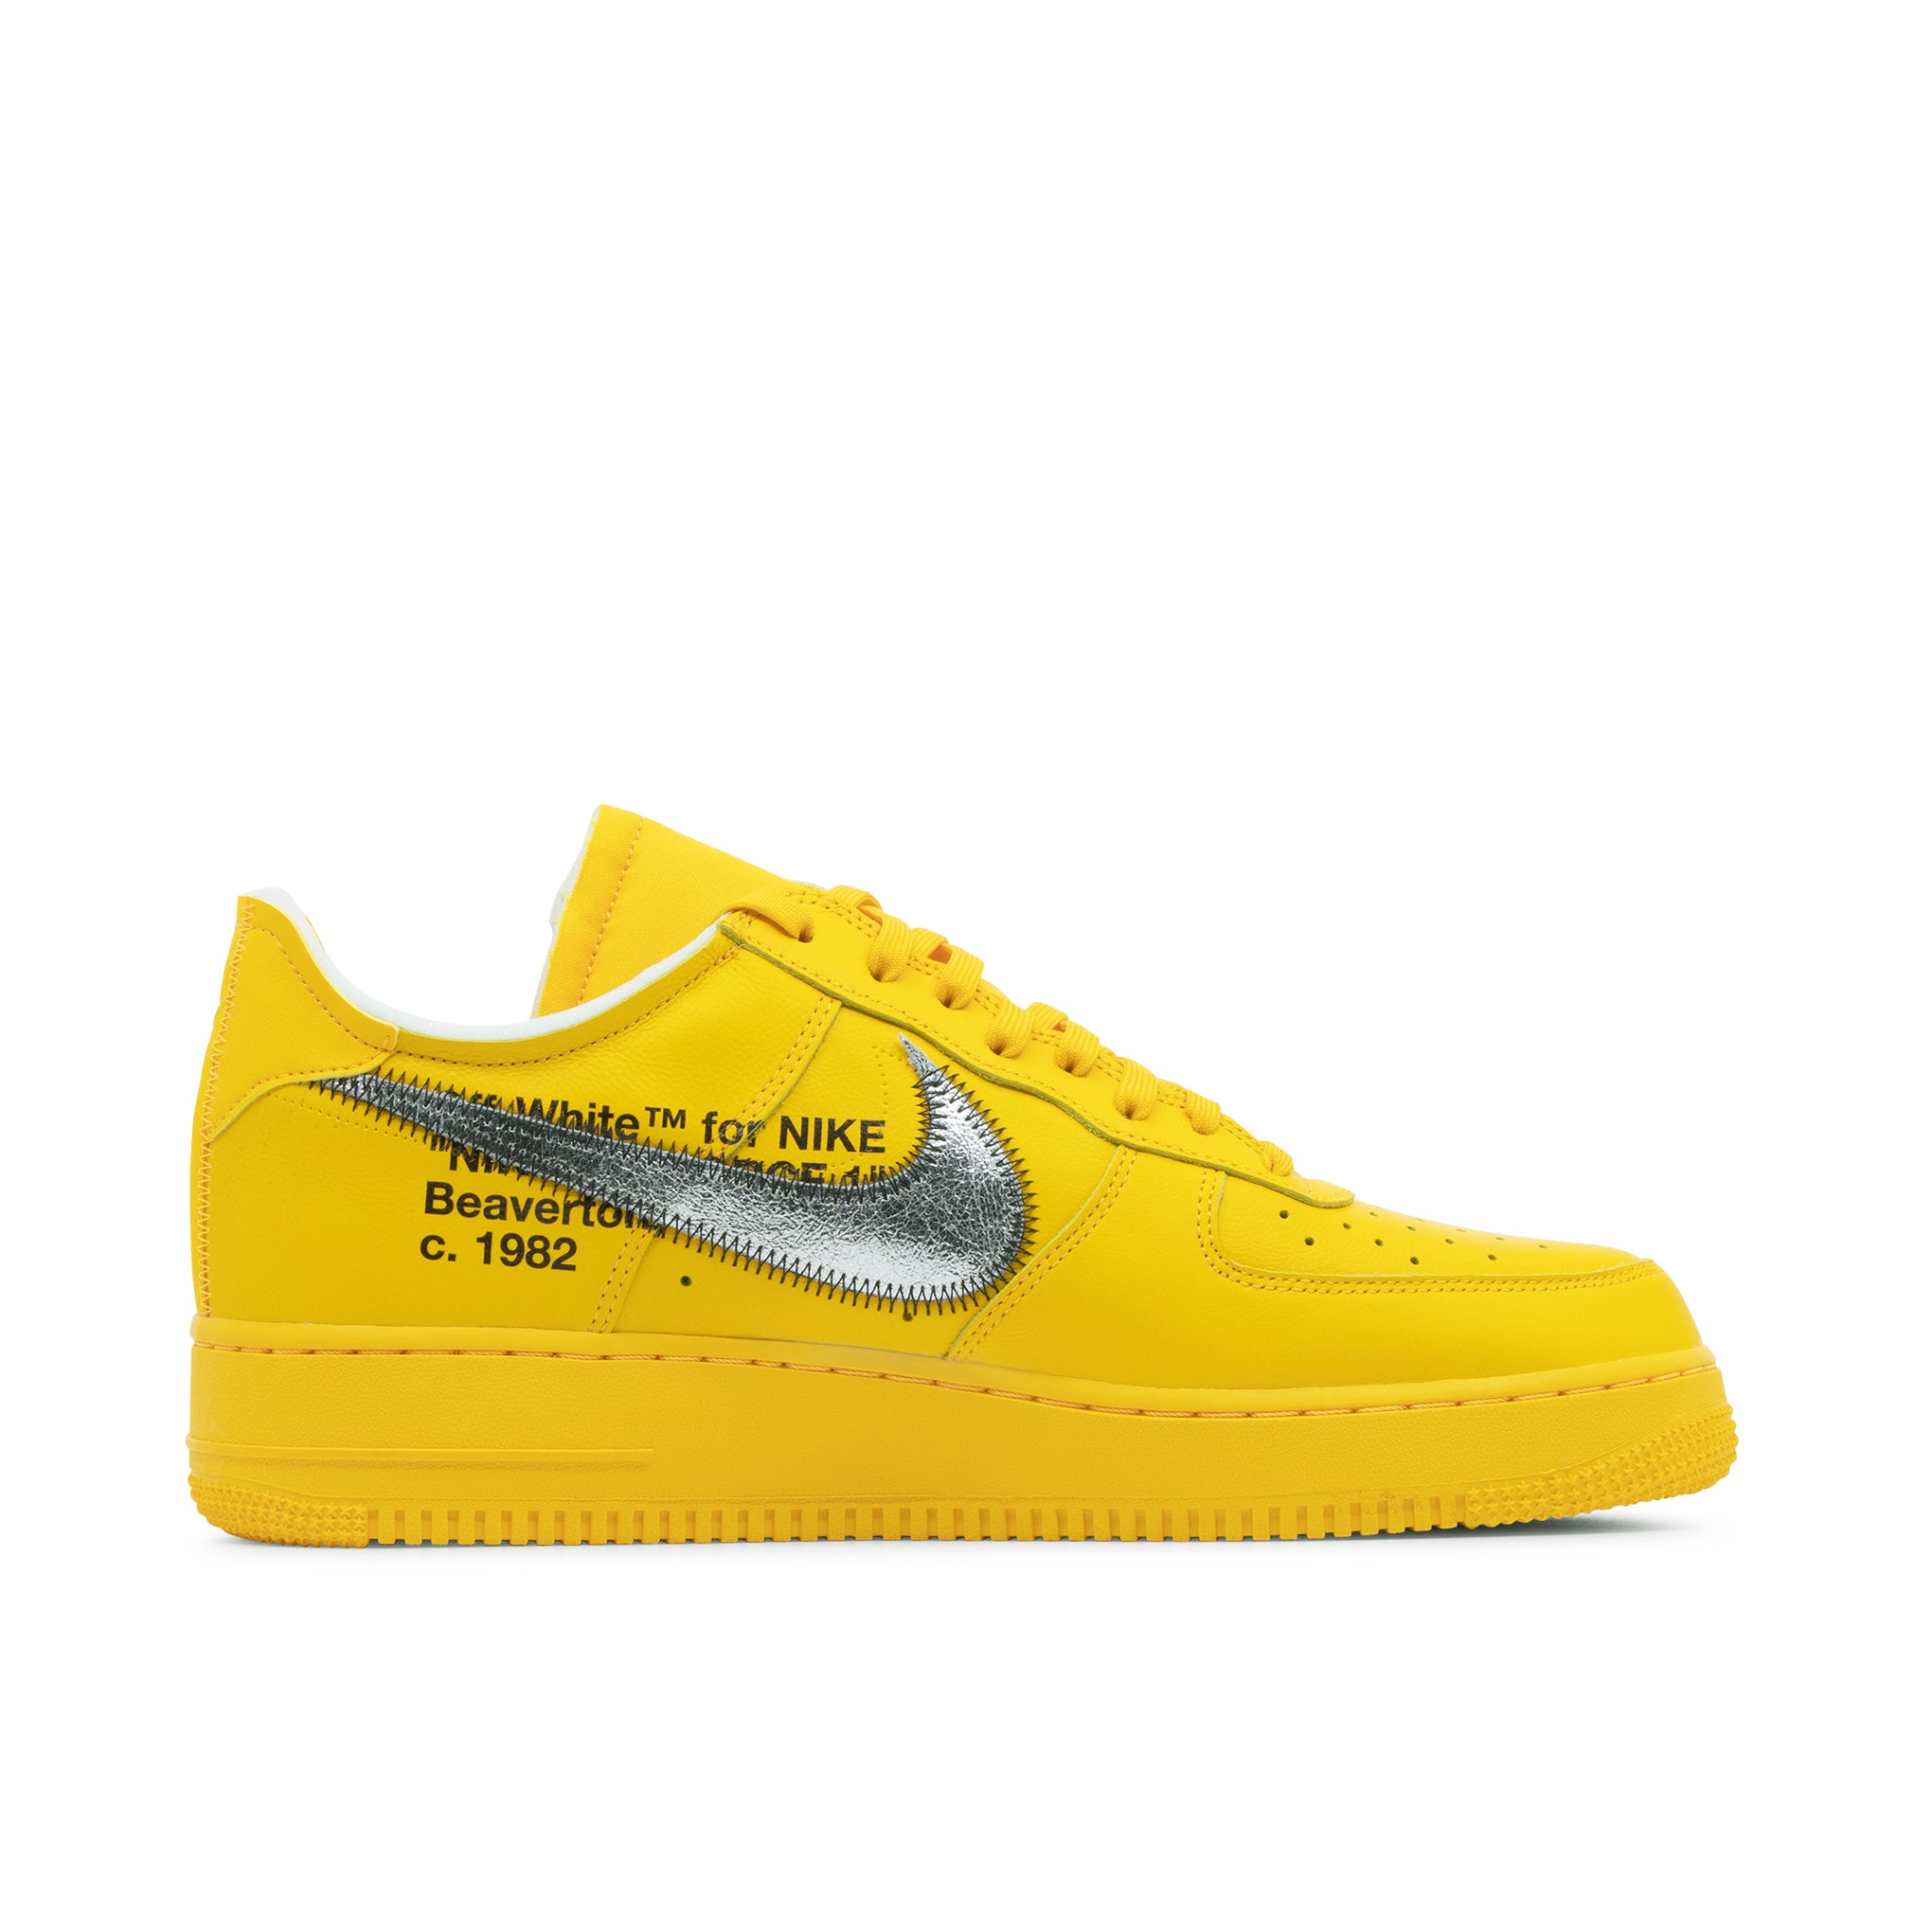 NIKE AIR FORCE 1 LOW OFF-WHITE UNIVERSITY GOLD